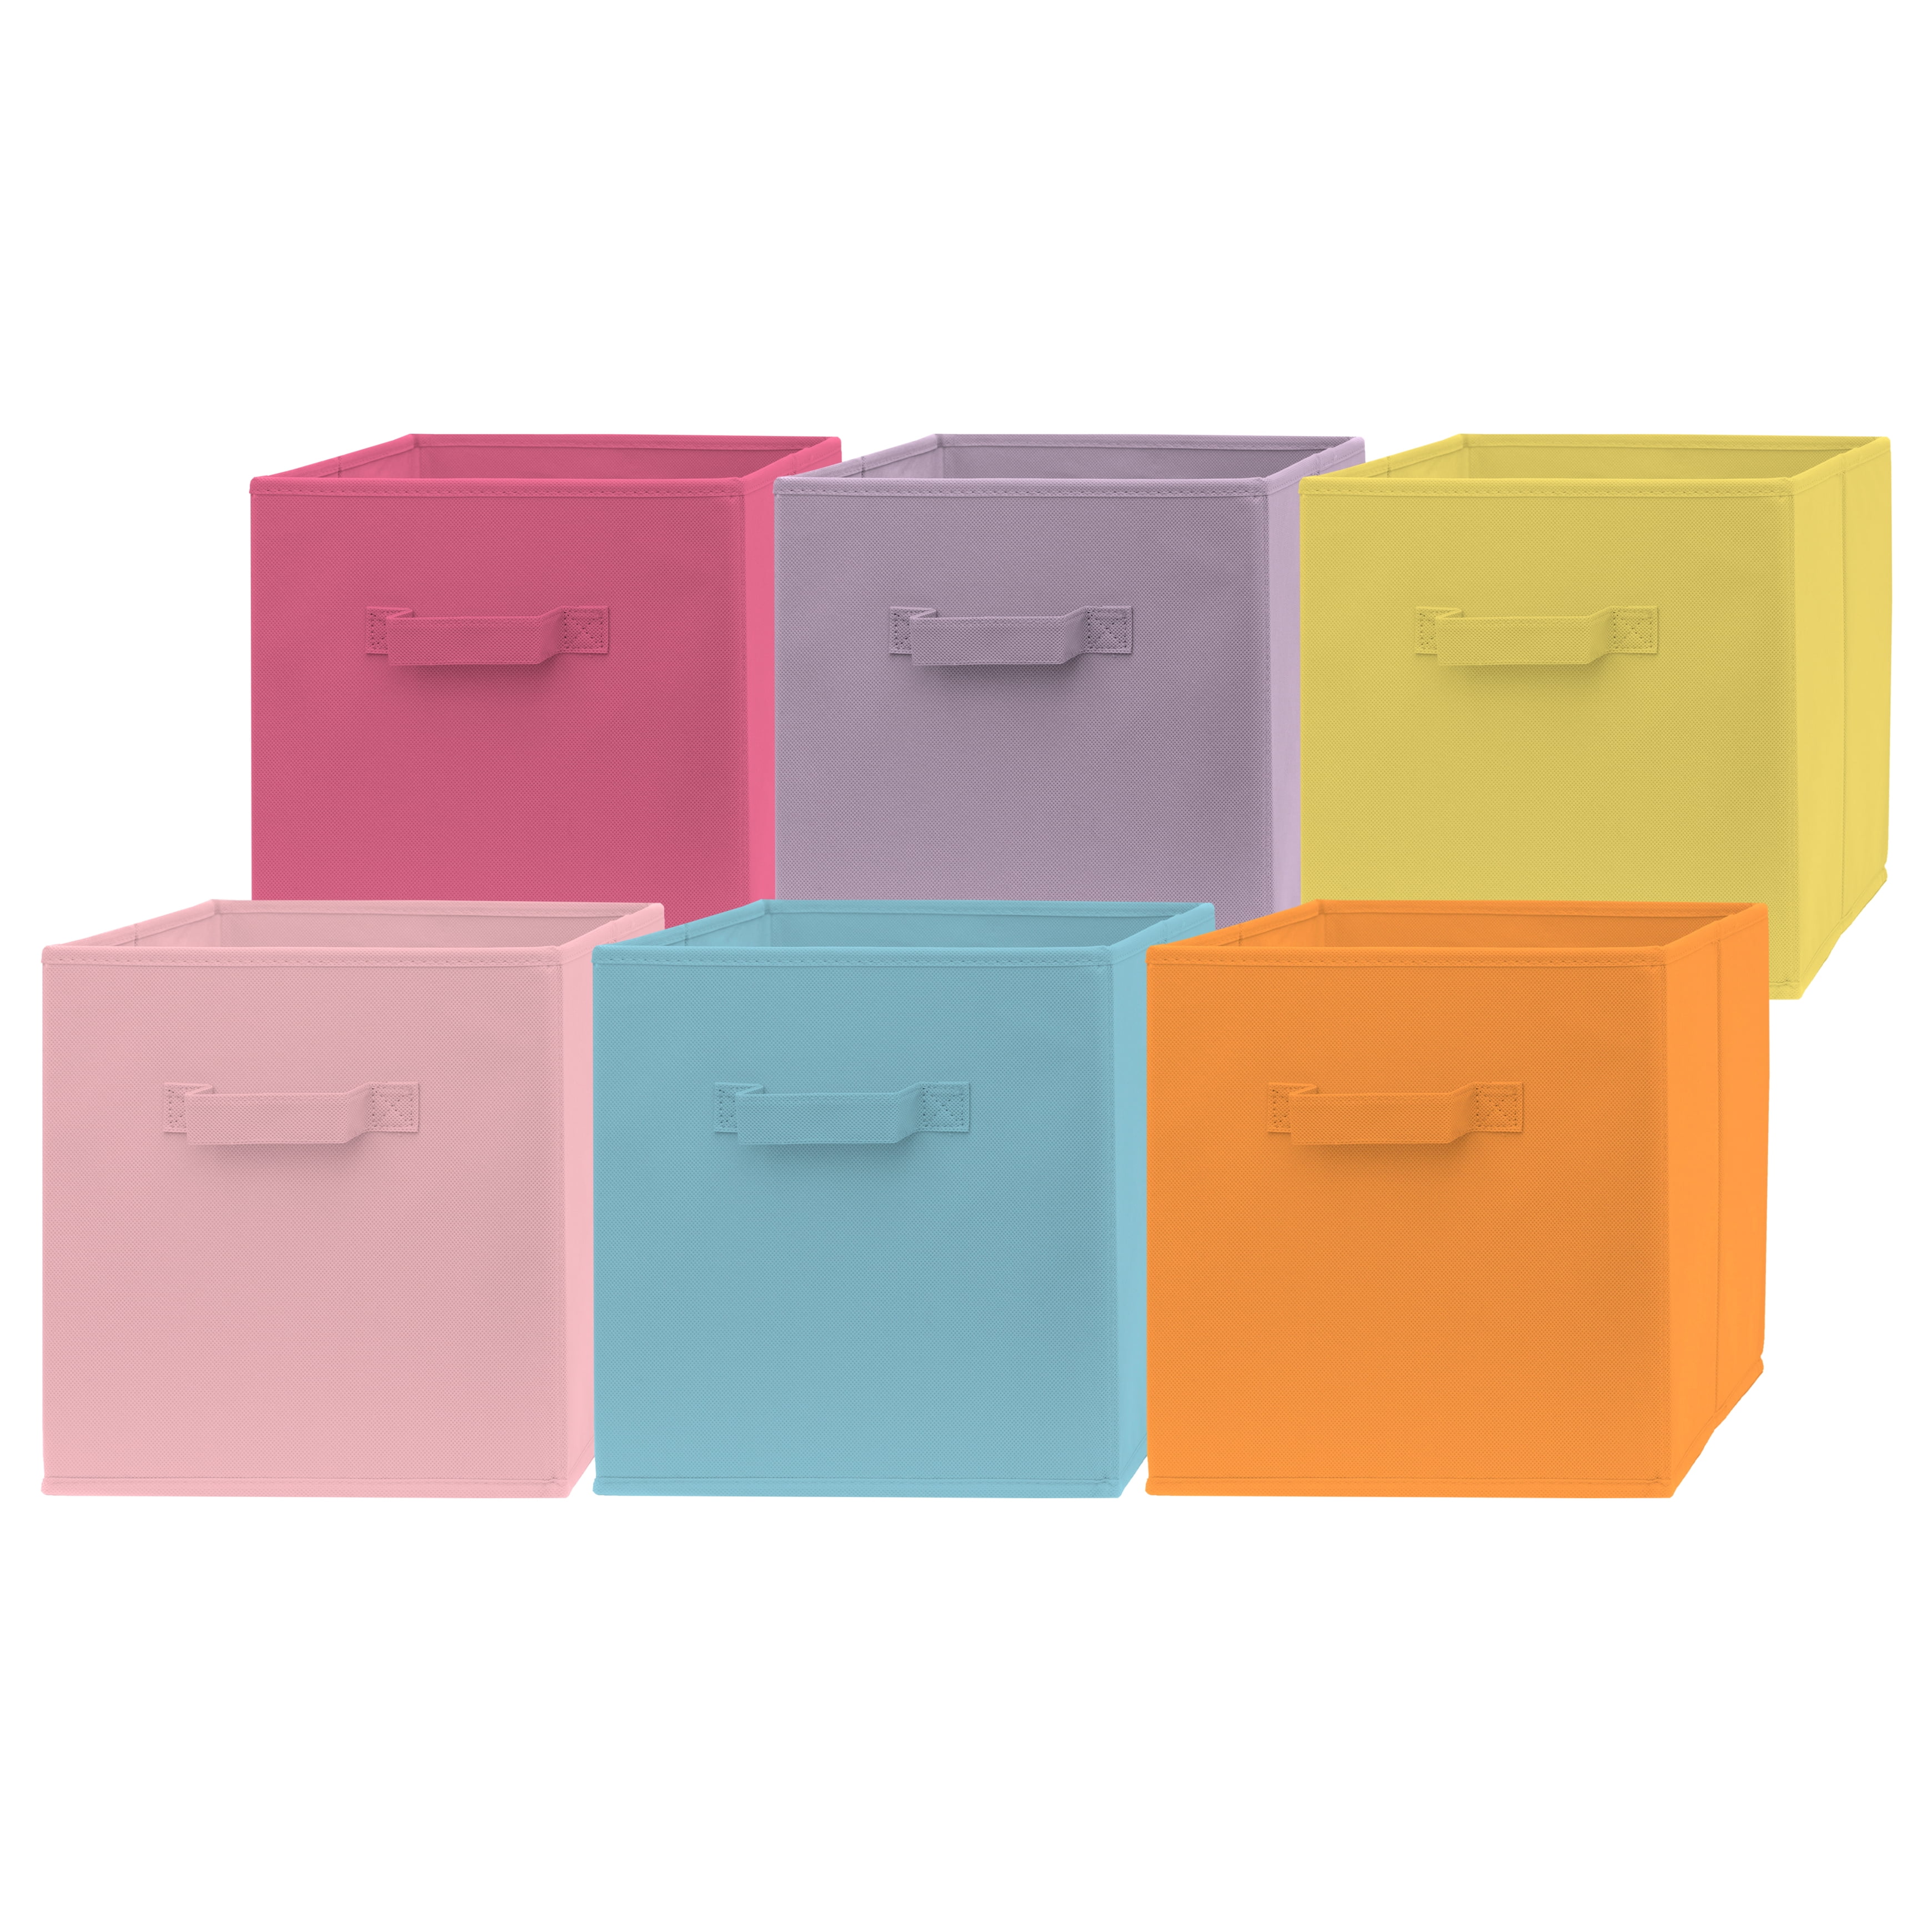 Souper Cubes - Our new @idlivesimply bins from @Costco